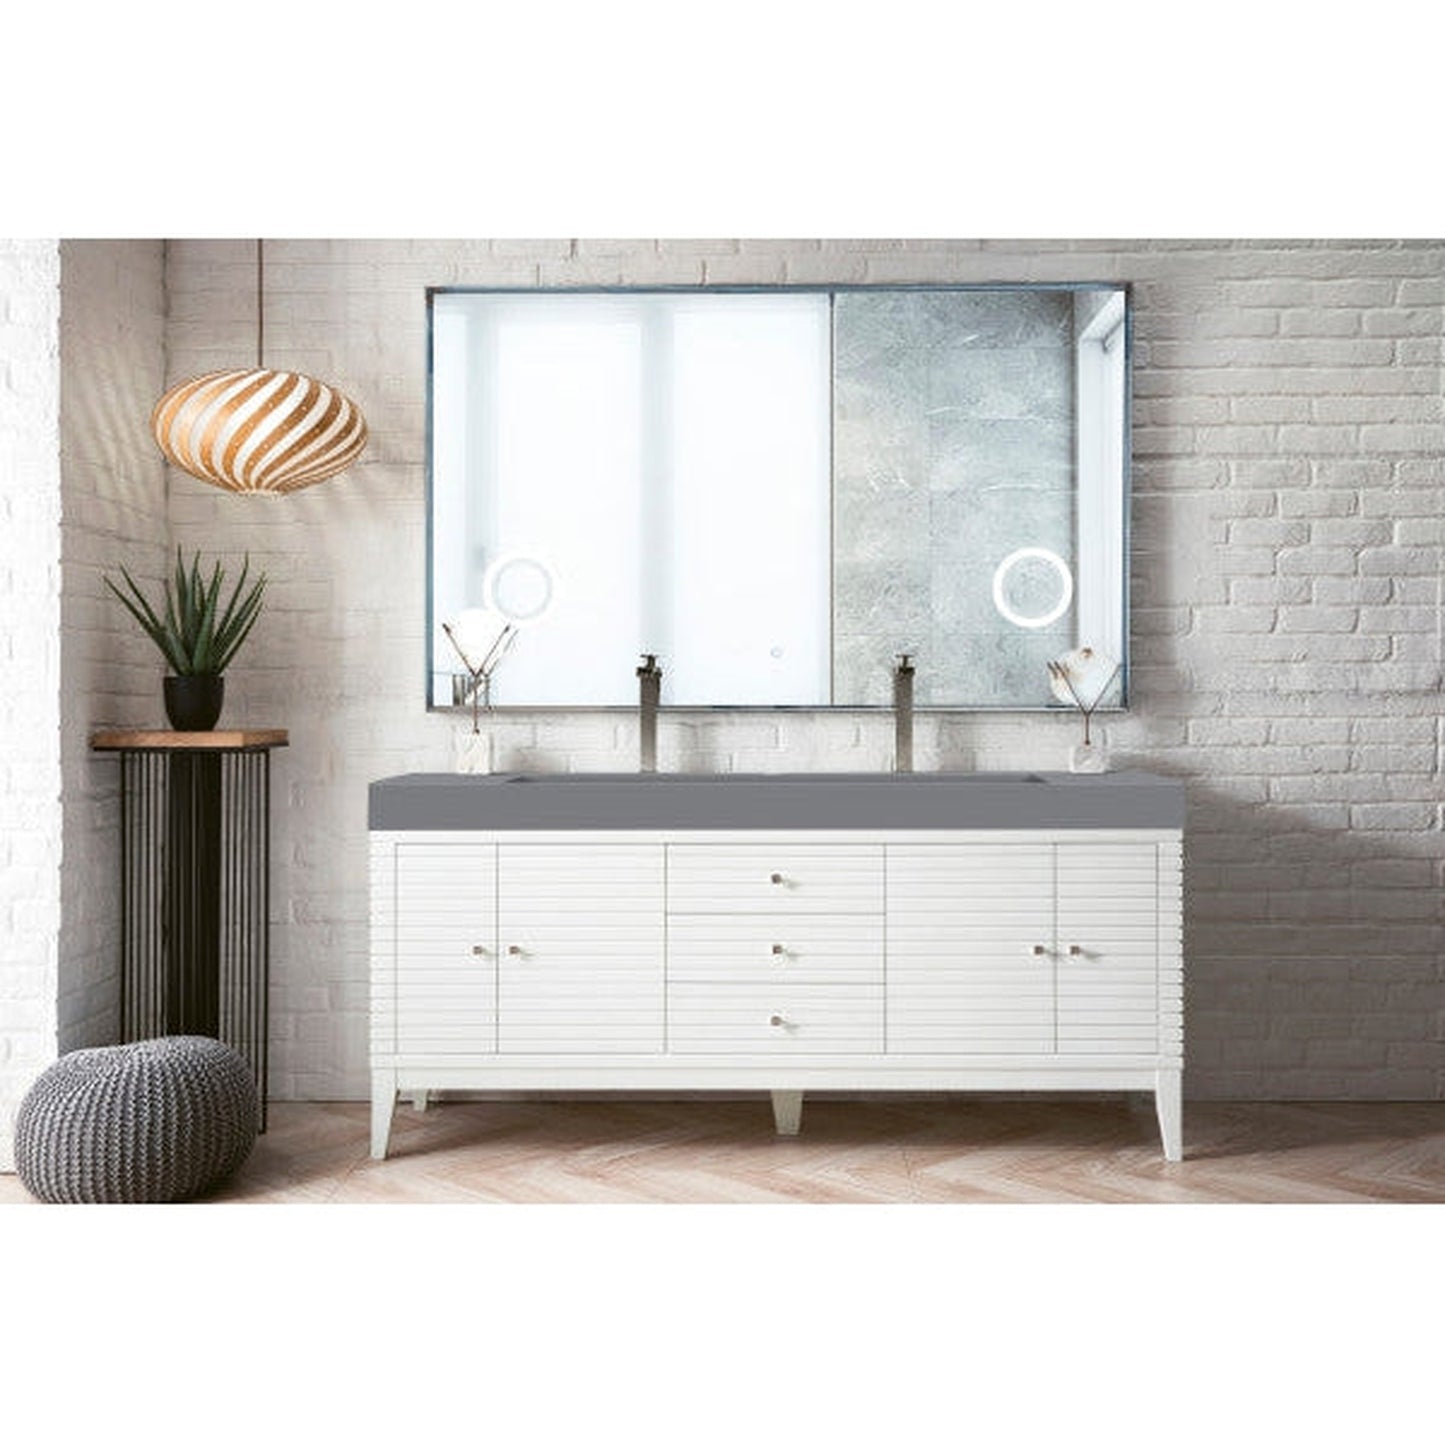 James Martin Linear 73" Double Glossy White Bathroom Vanity With 6" Glossy Dusk Gray Composite Countertop